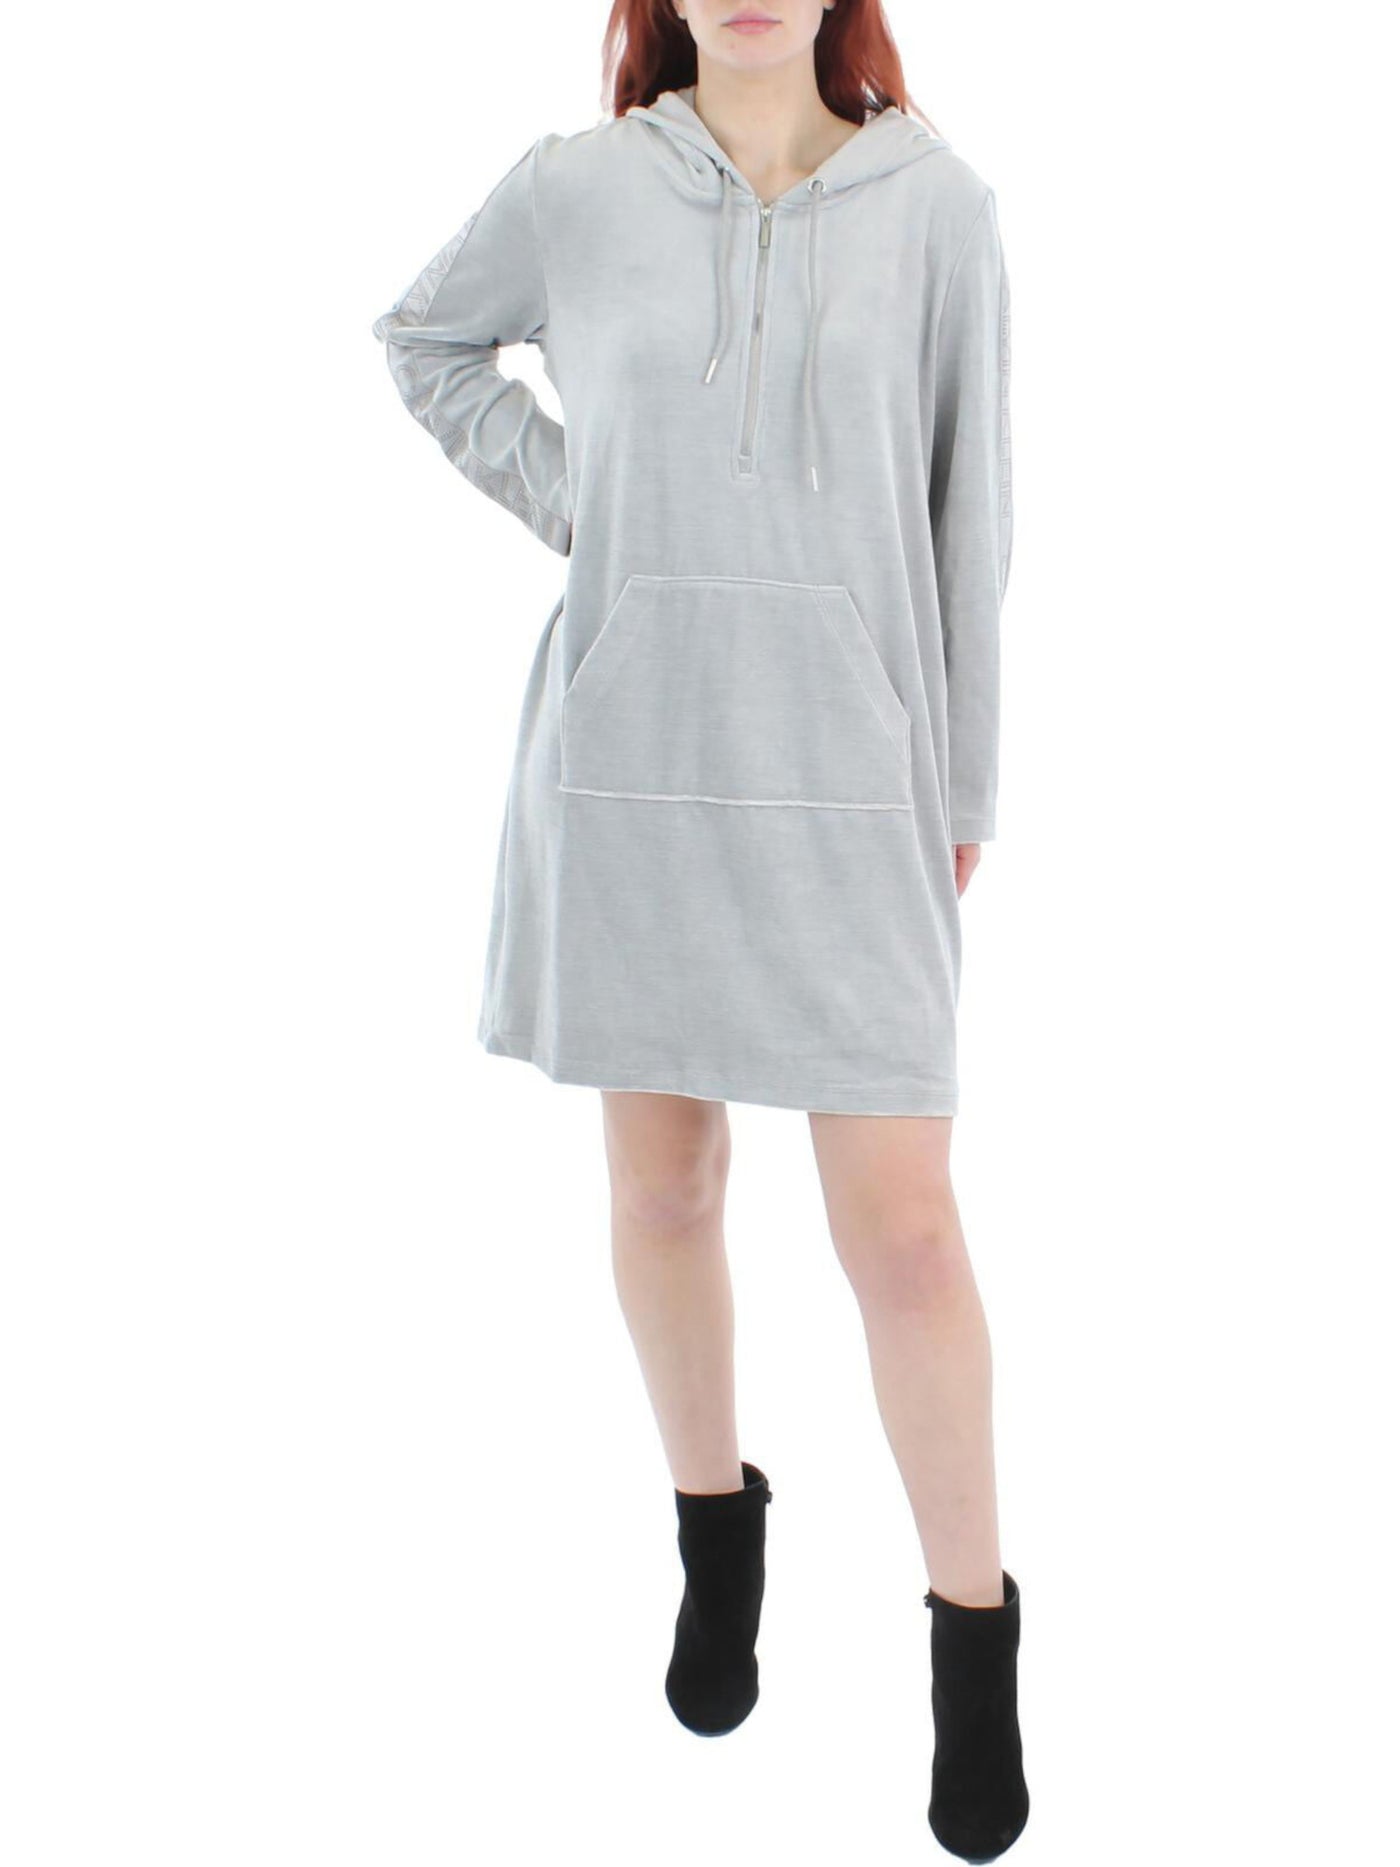 CALVIN KLEIN Womens Gray Zippered Pocketed Drawstring Pullover Hoodie Logo Graphic Long Sleeve Above The Knee Sweatshirt Dress S